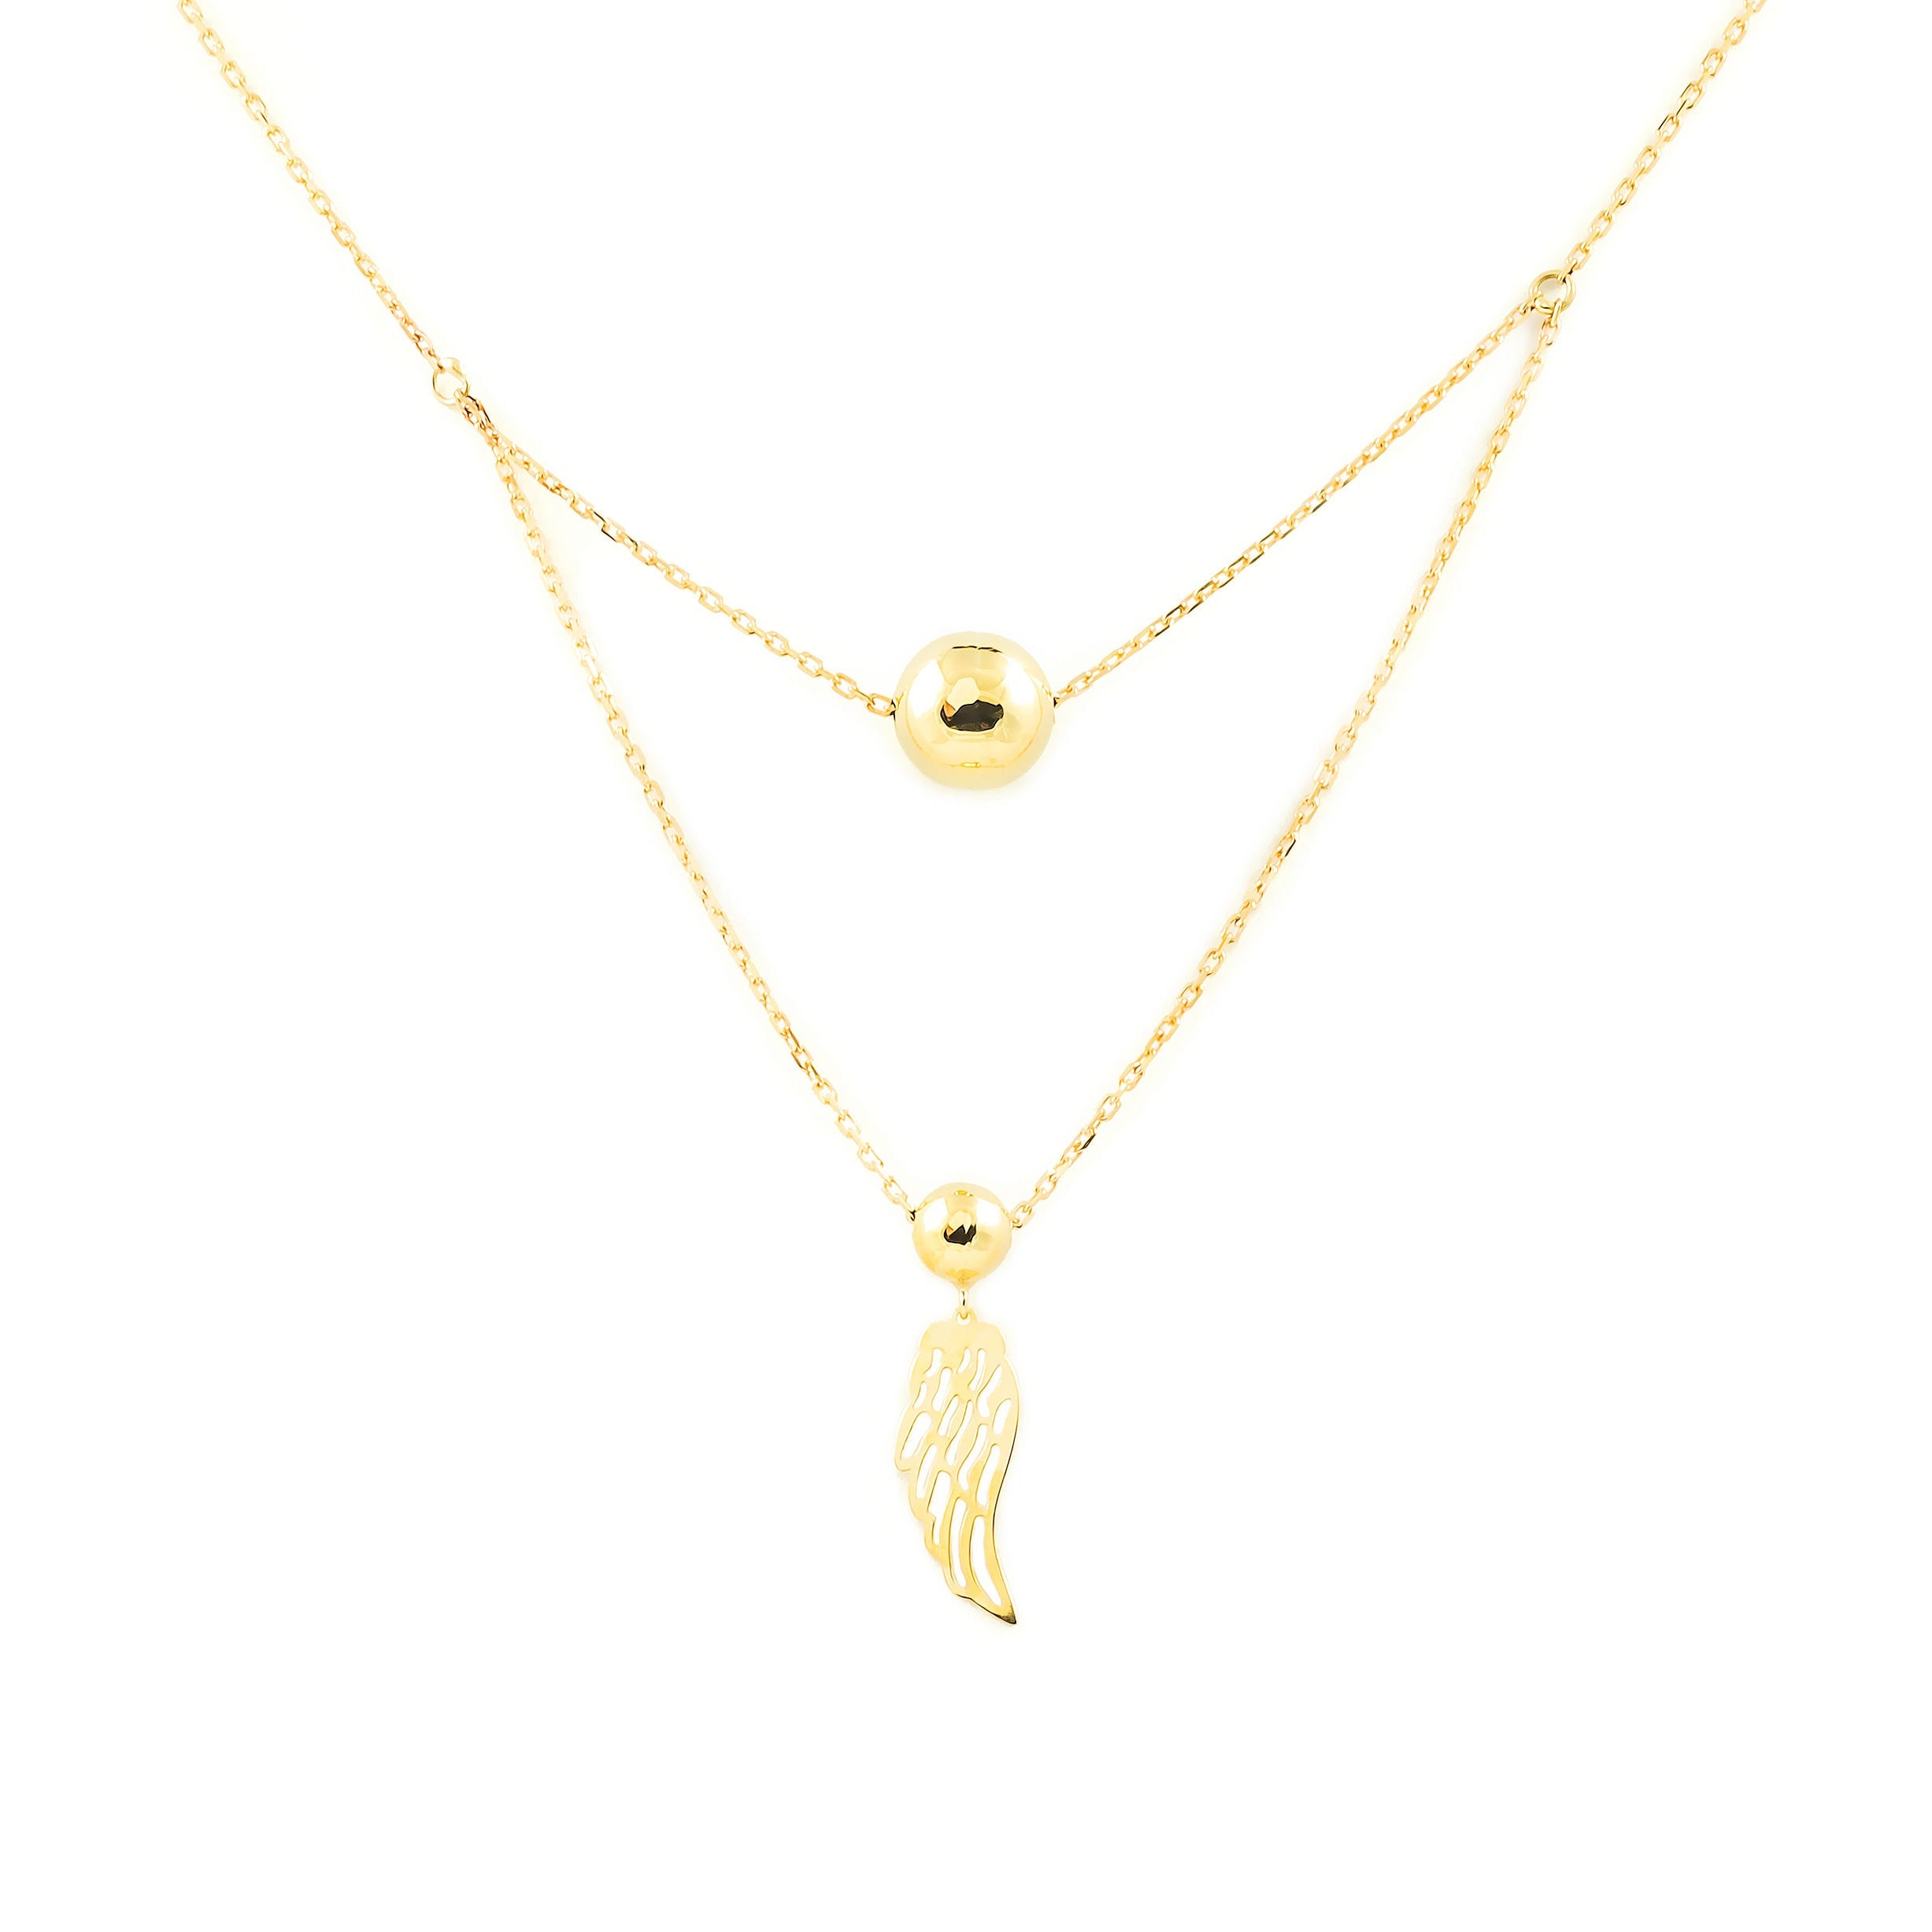 Women's Necklace 9K Yellow Gold Balls and Shiny Wing